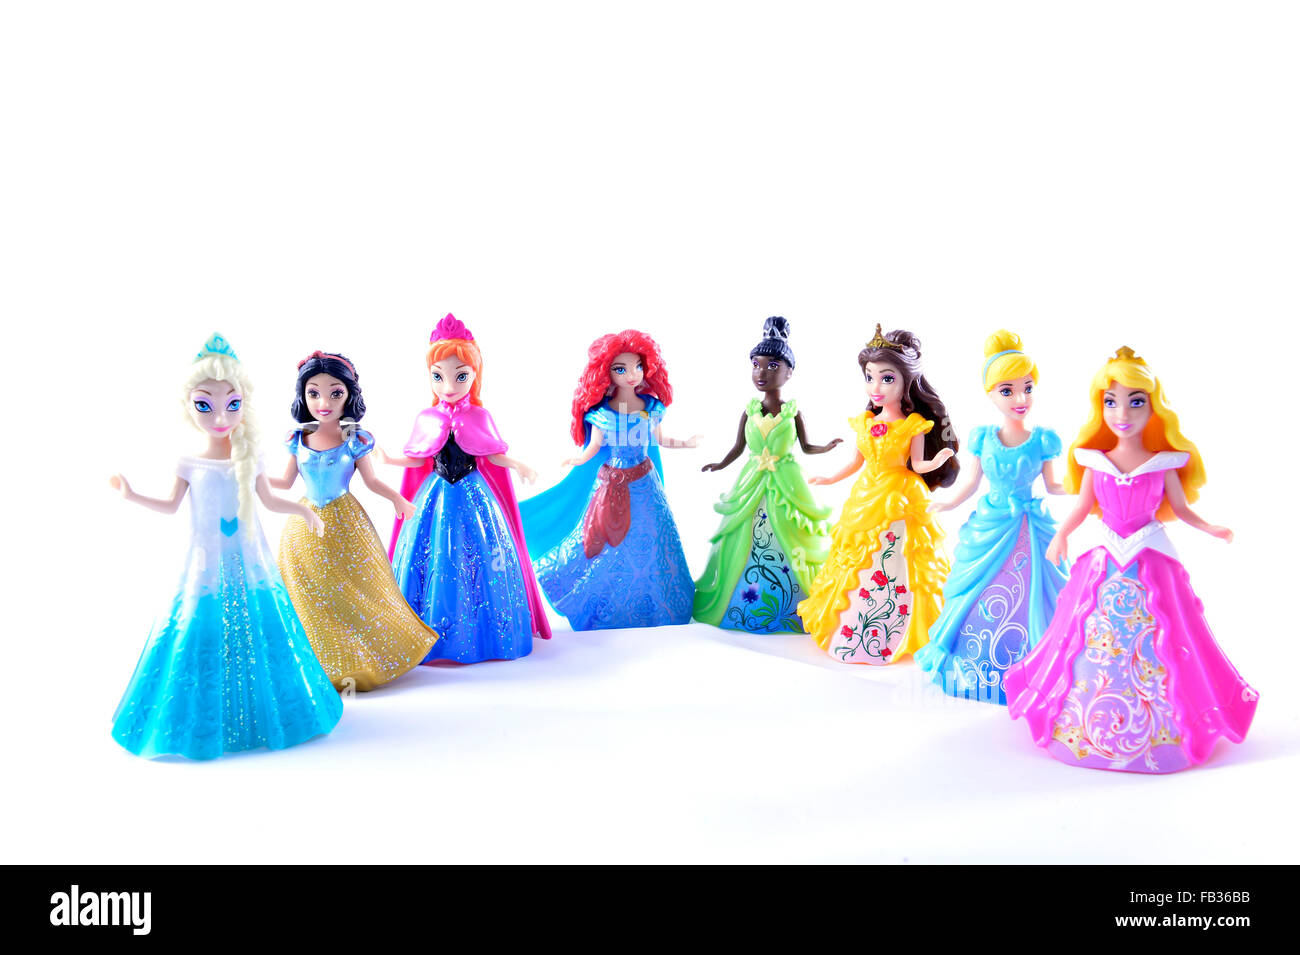 A collection of Disney Princess Magiclip Toy Dolls Stock Photo